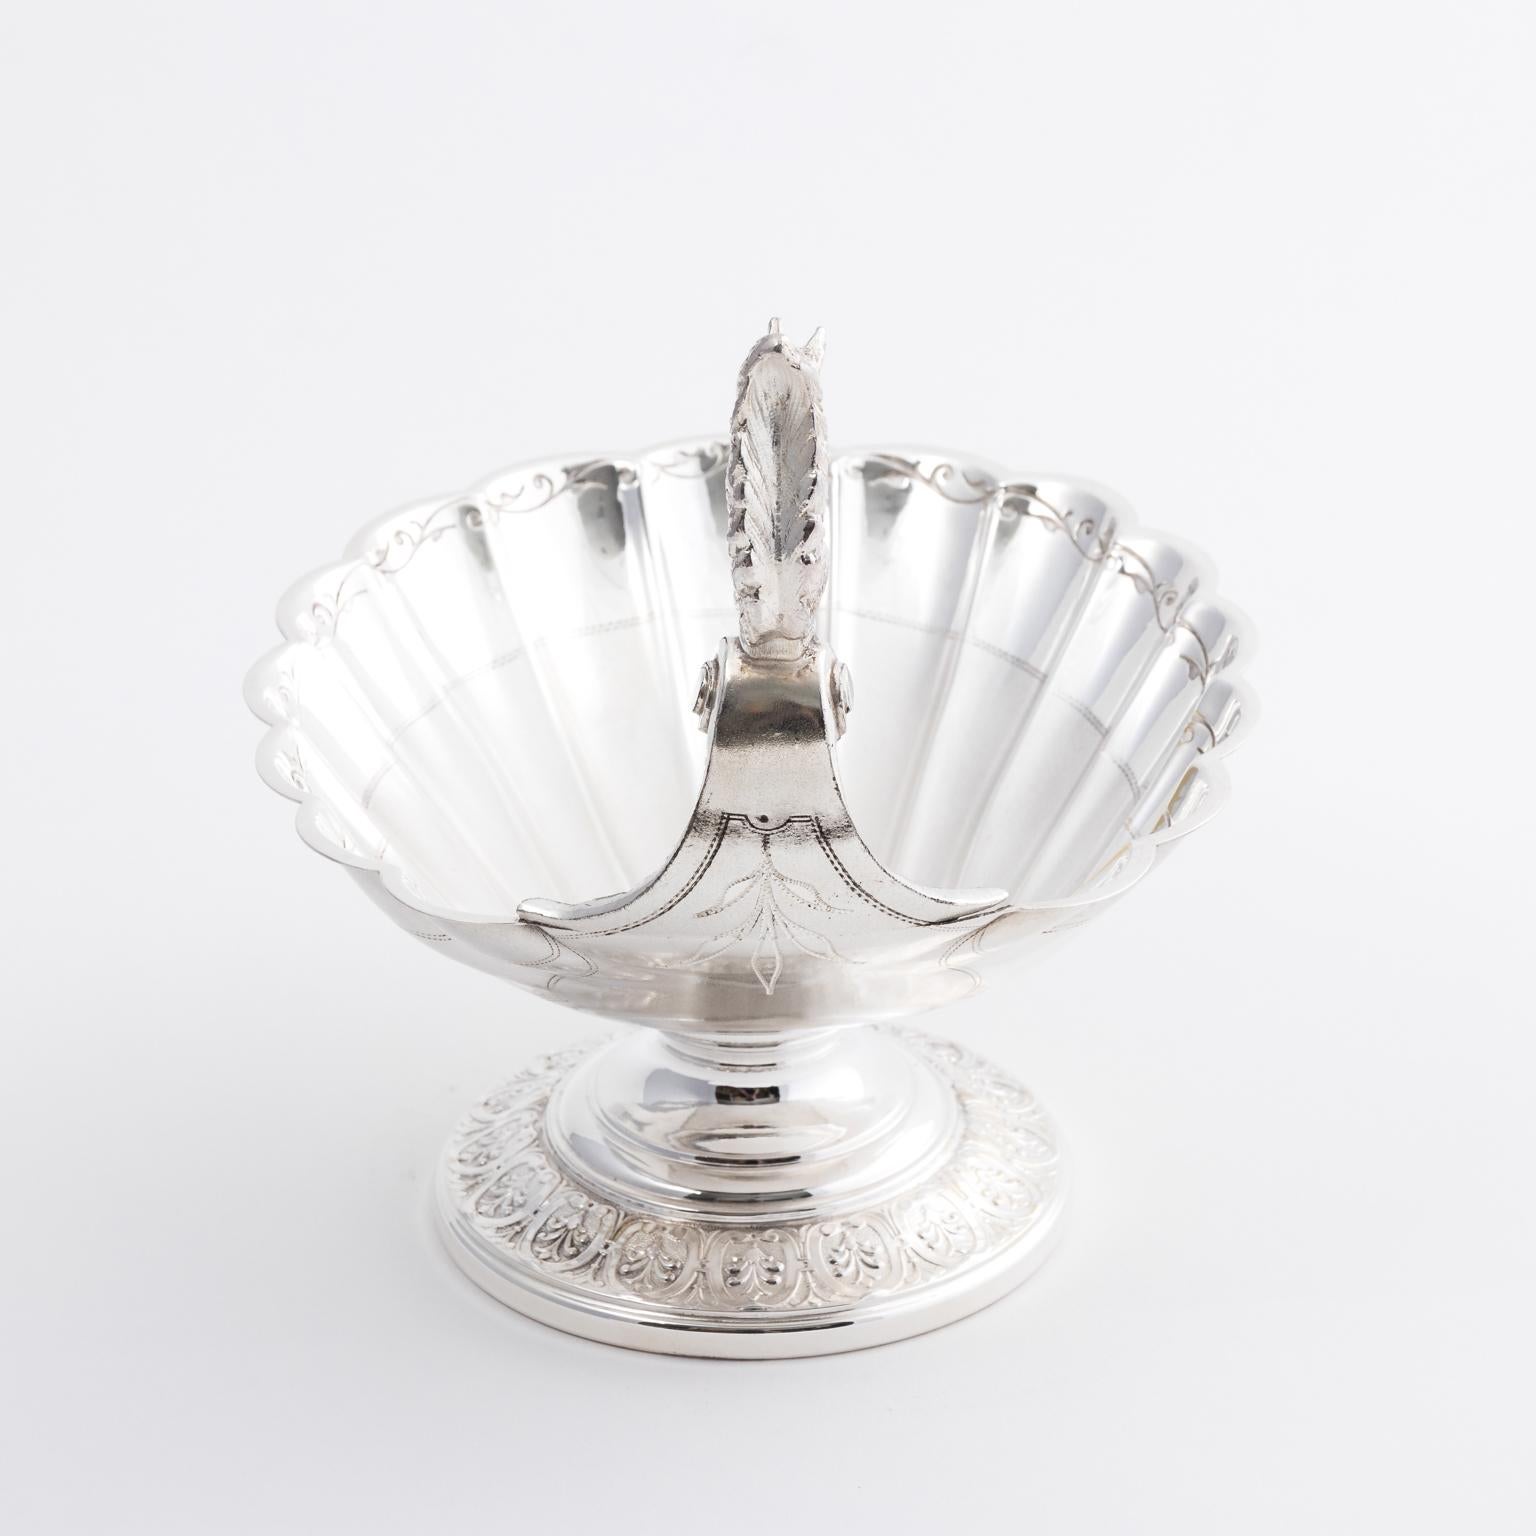 Edwardian silver plated nut serving dish with scallop shell dish and detailed squirrel on handle, circa 1900.
   